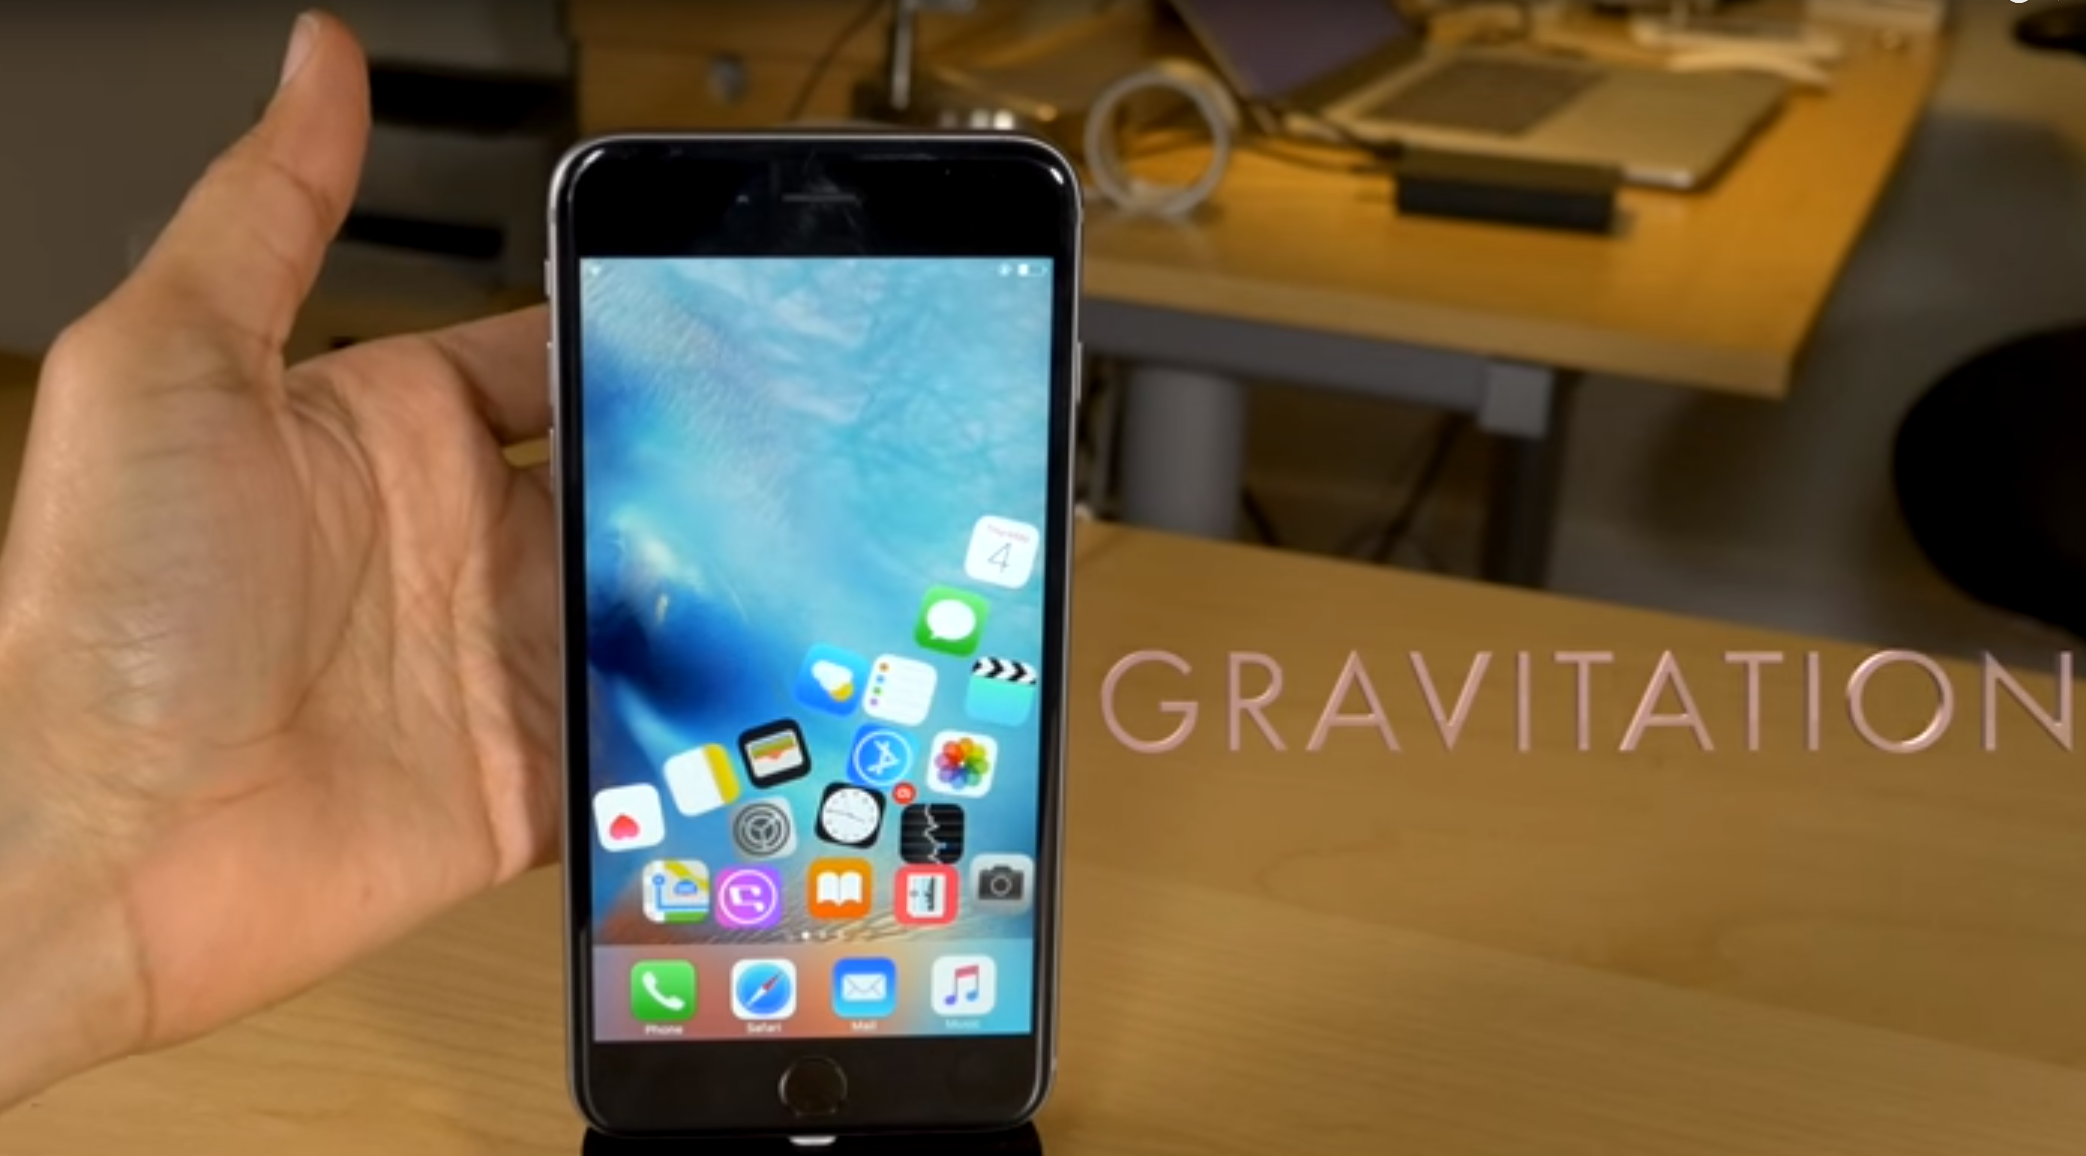  Gravitation is Getting an Update for iOS 11 Soon